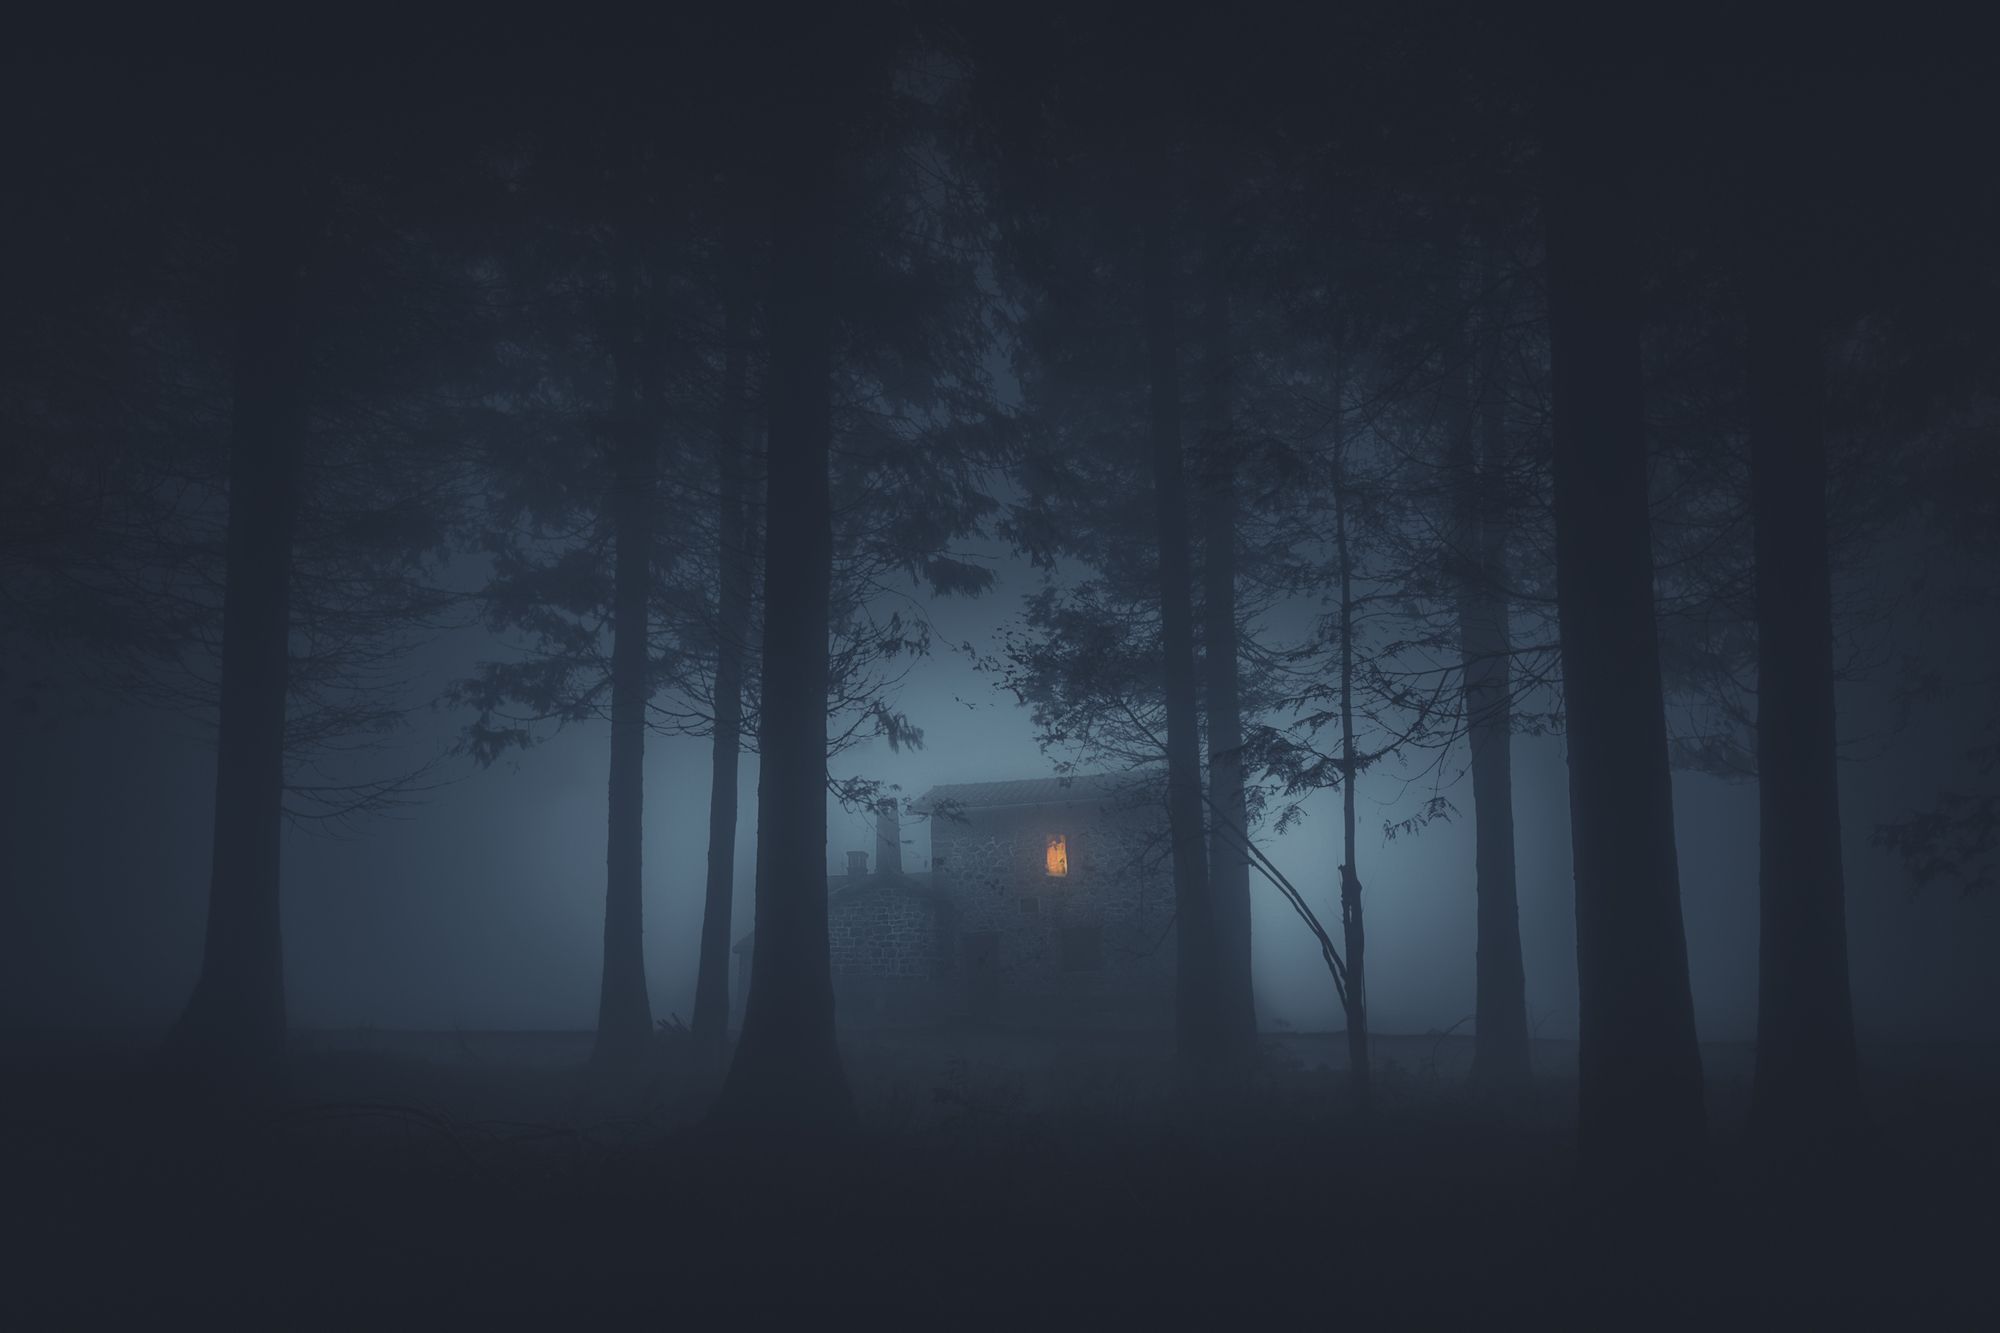 house with illuminated window visible in a spooky foggy forest